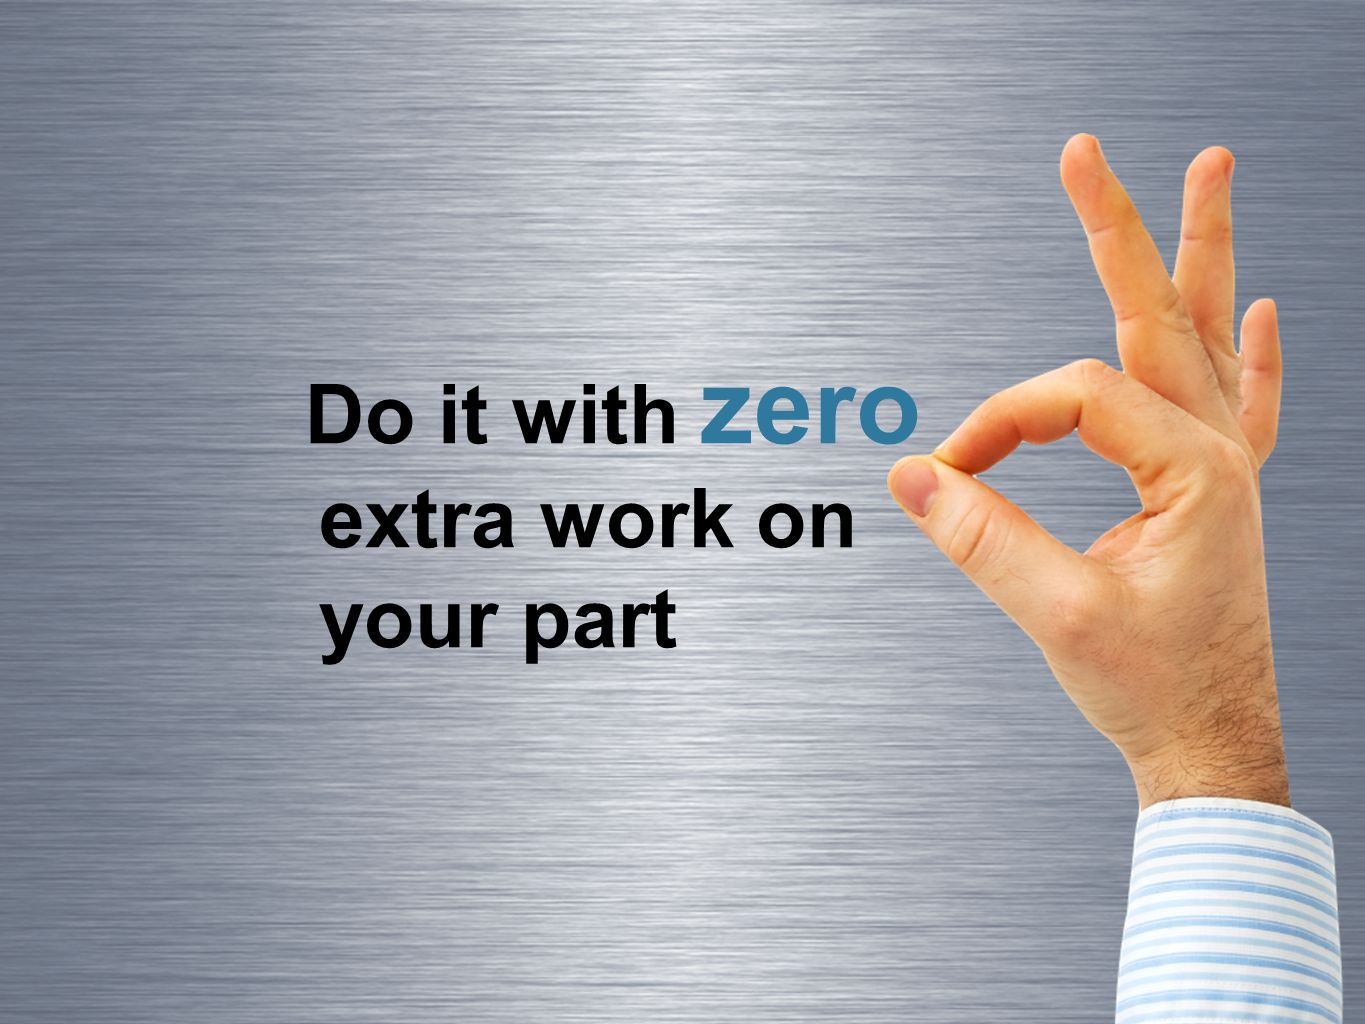 Do it with zero extra work on your part